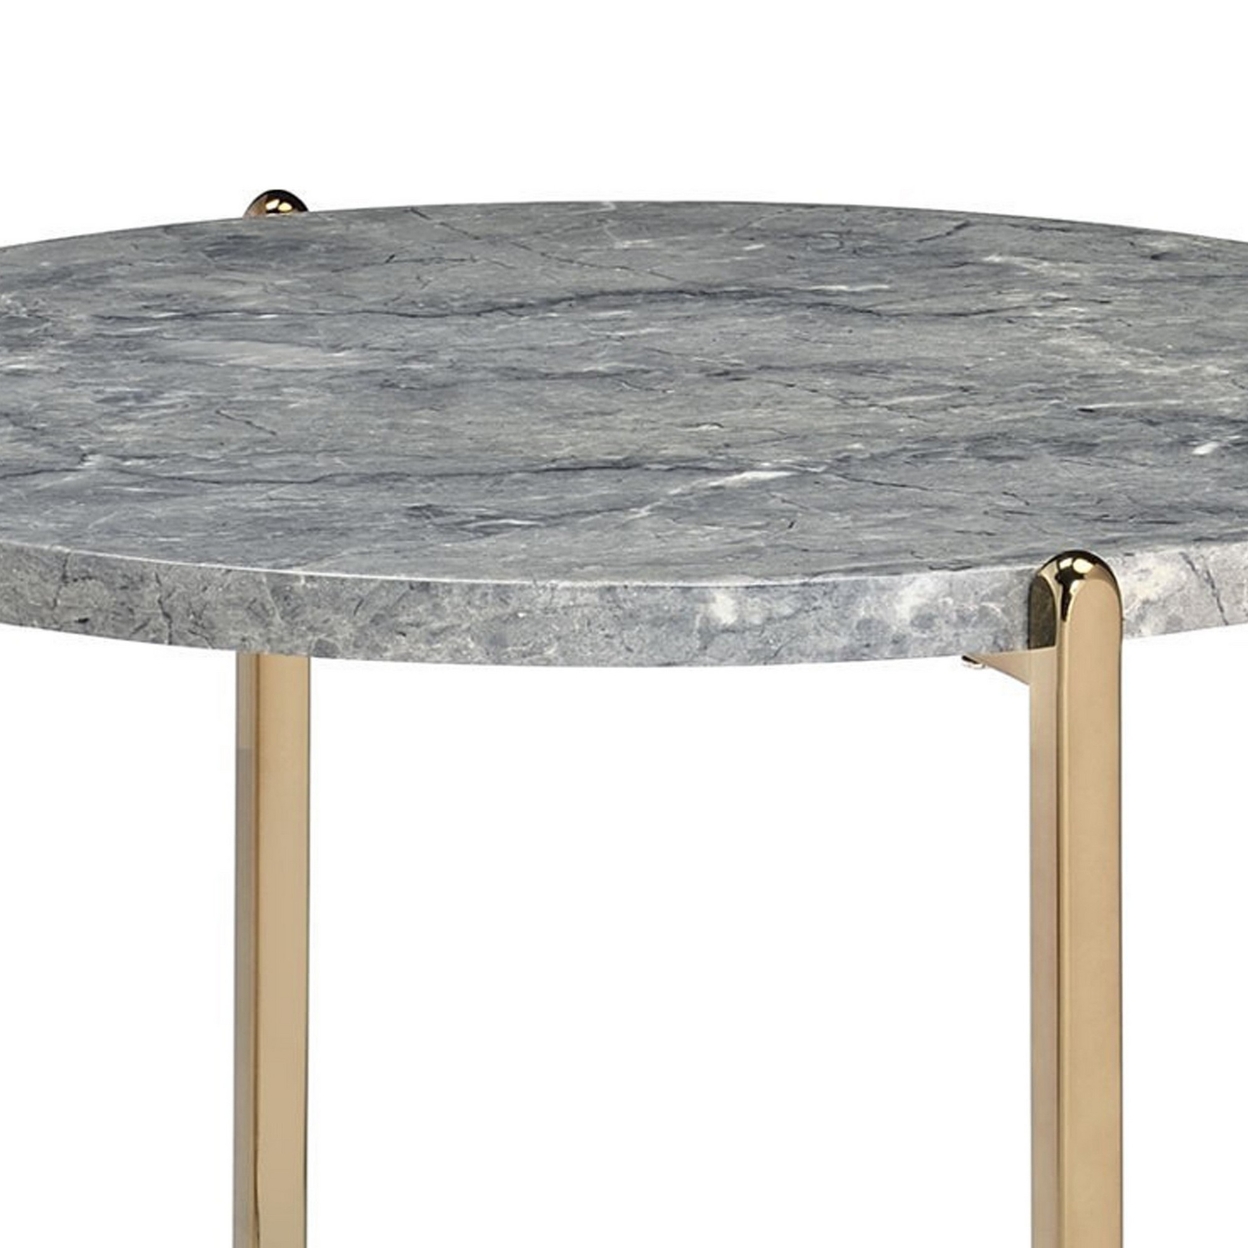 End Table With Oval Marble Top And X Shaped Support, Gray And Gold- Saltoro Sherpi